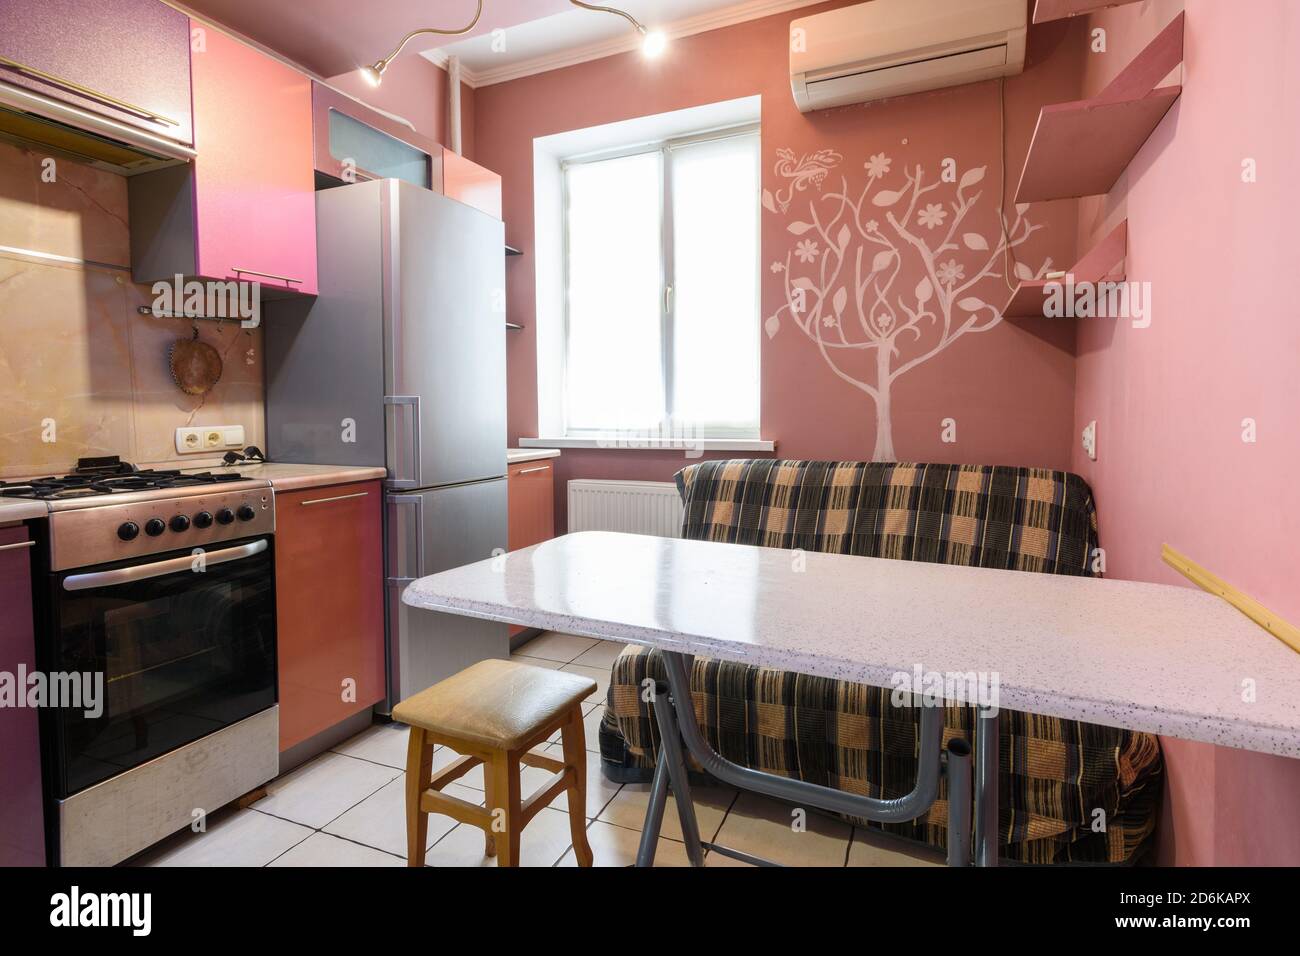 Kitchen Table And Sofa In The Interior Of The Kitchen Stock Photo Alamy